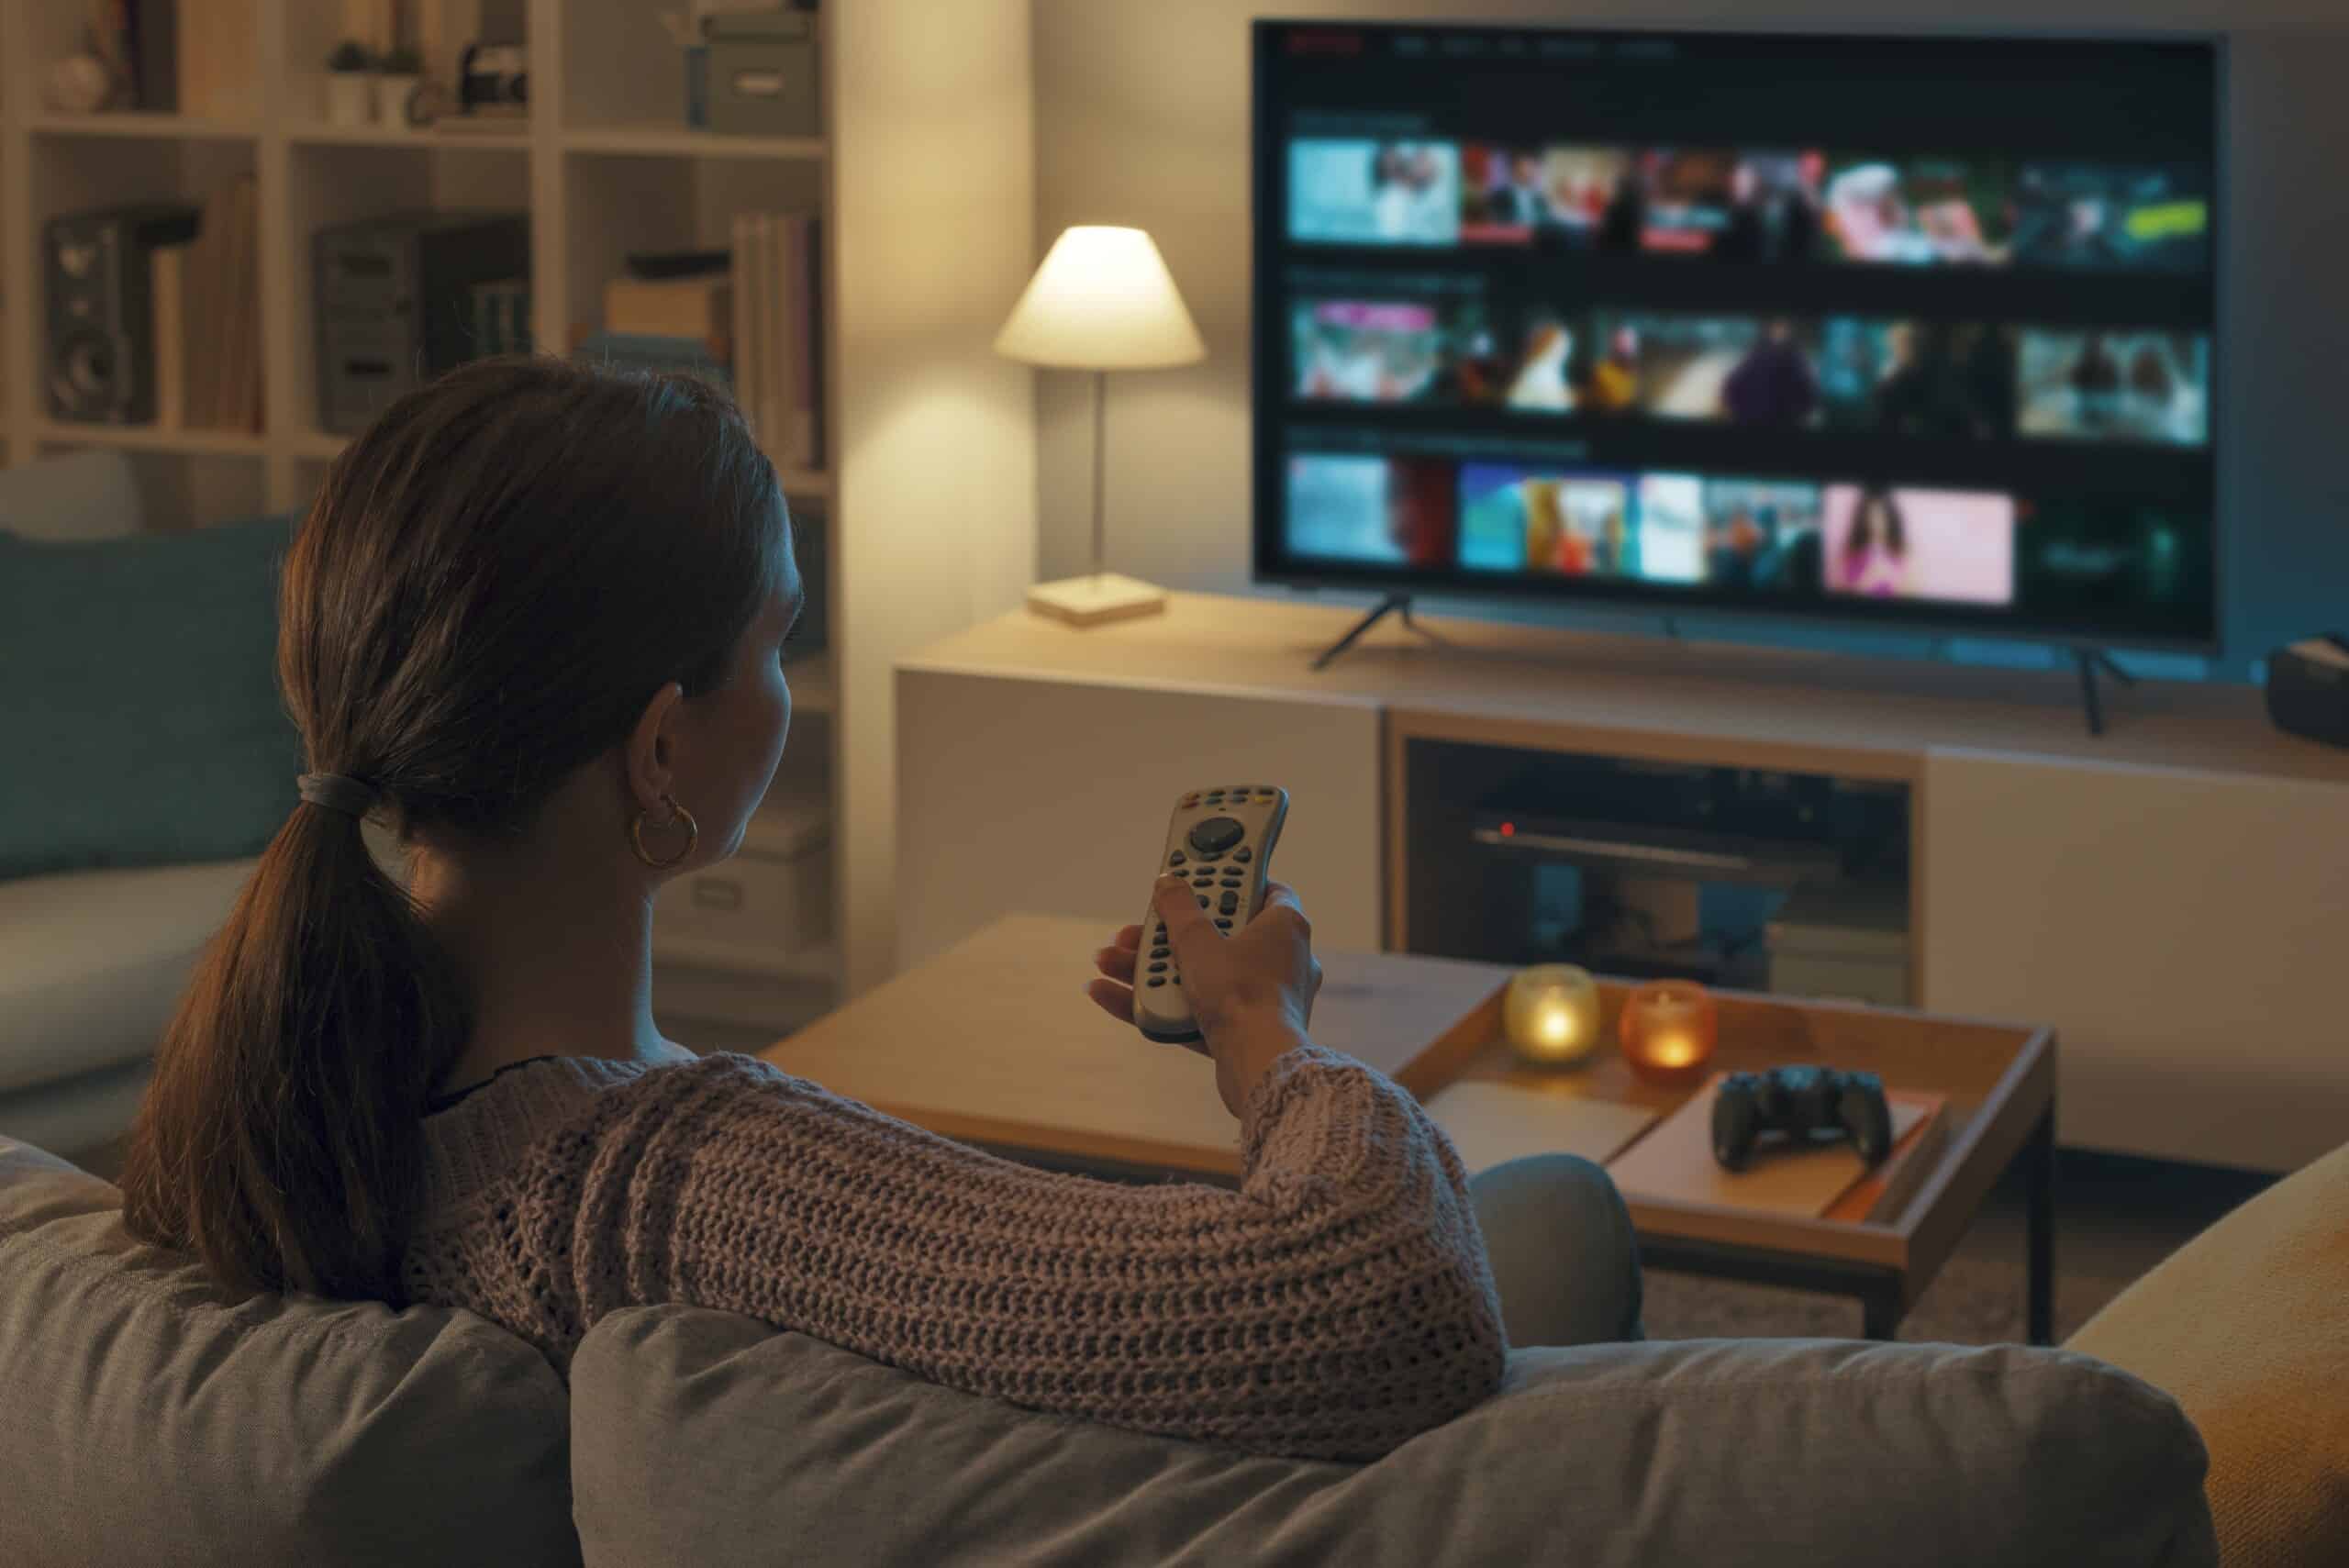 A woman holding a TV remote while sitting on the couch in front of a TV. The lighting is low, with candles and lamps lighting the space.